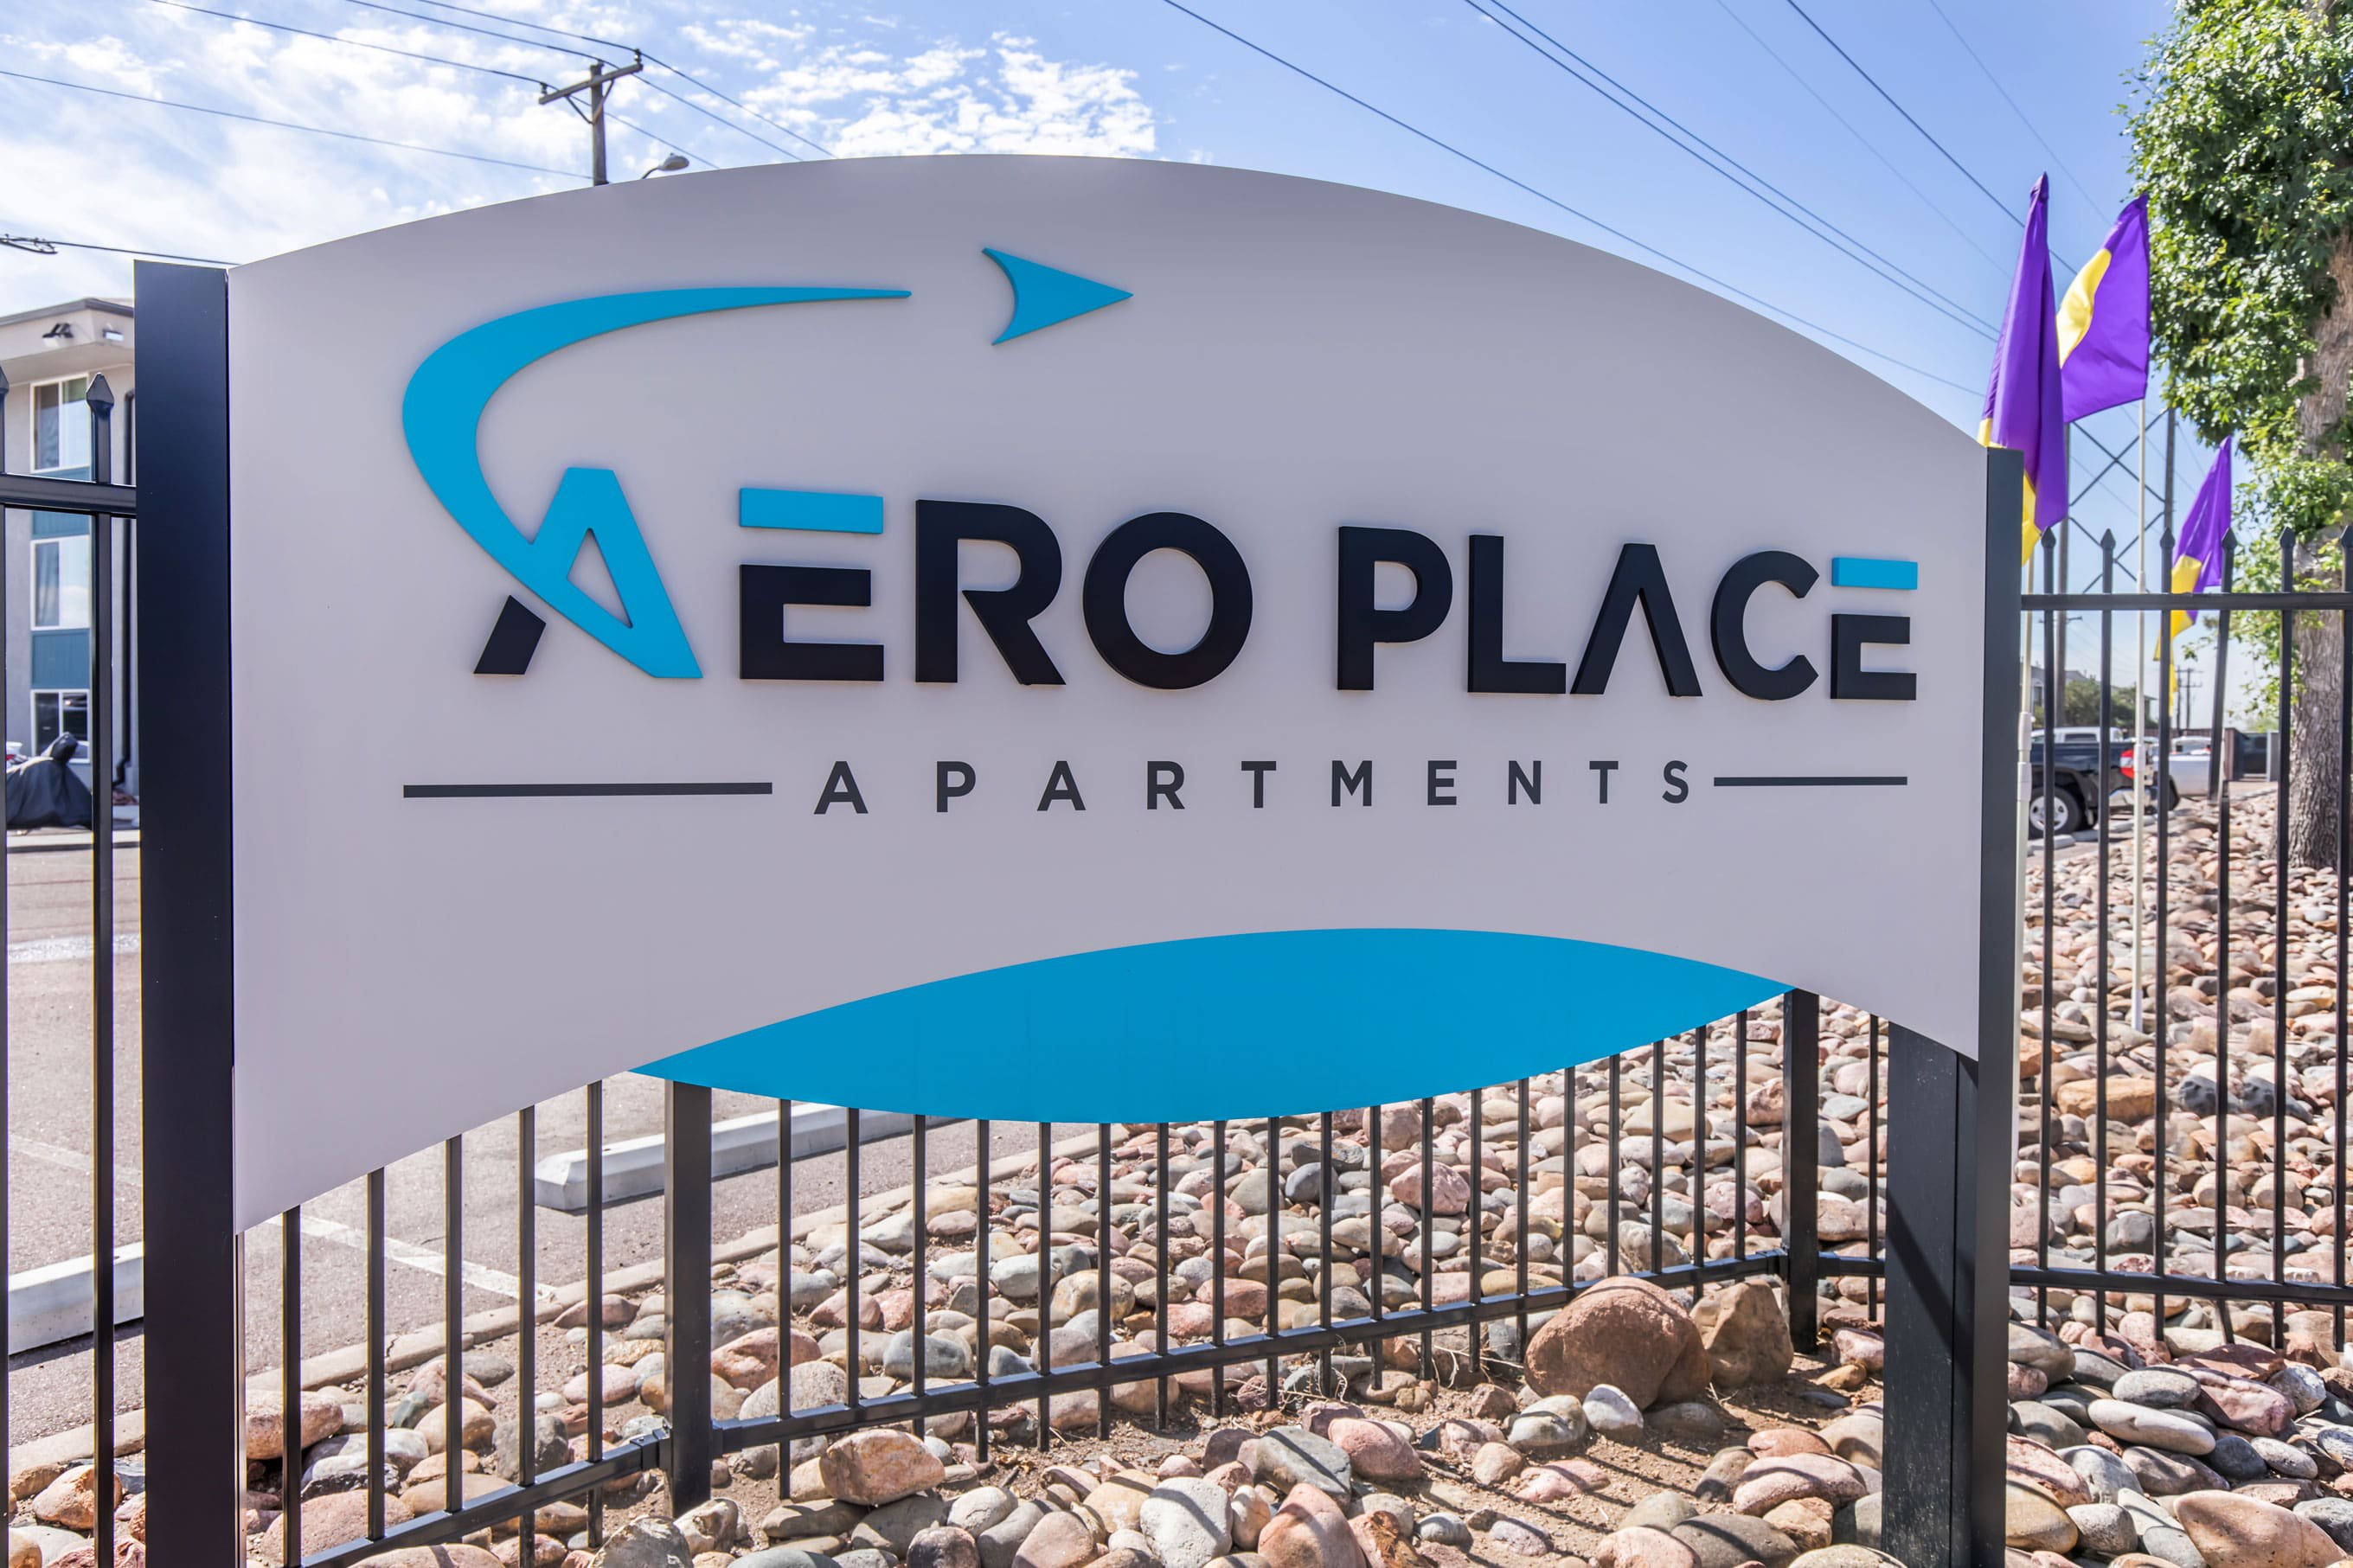 exterior sign at the Aero Place Apartments, located in Colorado Springs, CO.